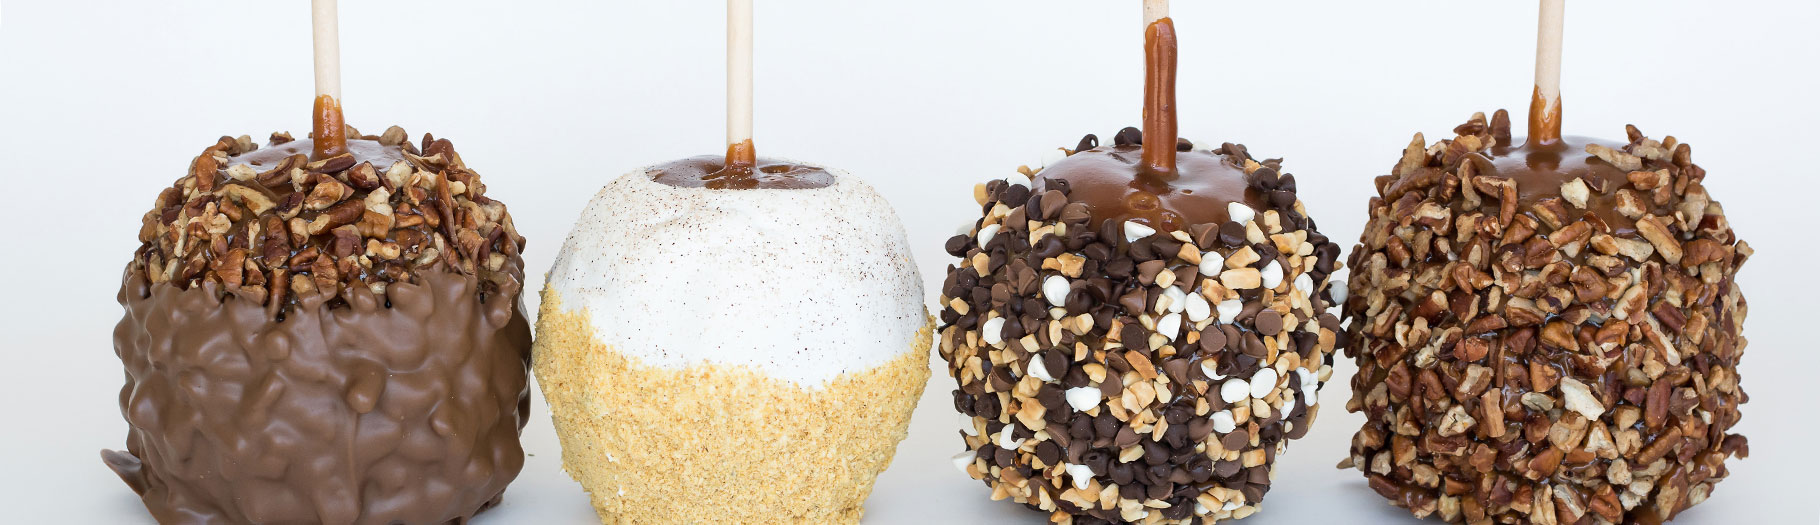 Specialty Gourmet Caramel Apple Flavors for gifts, treats, favors